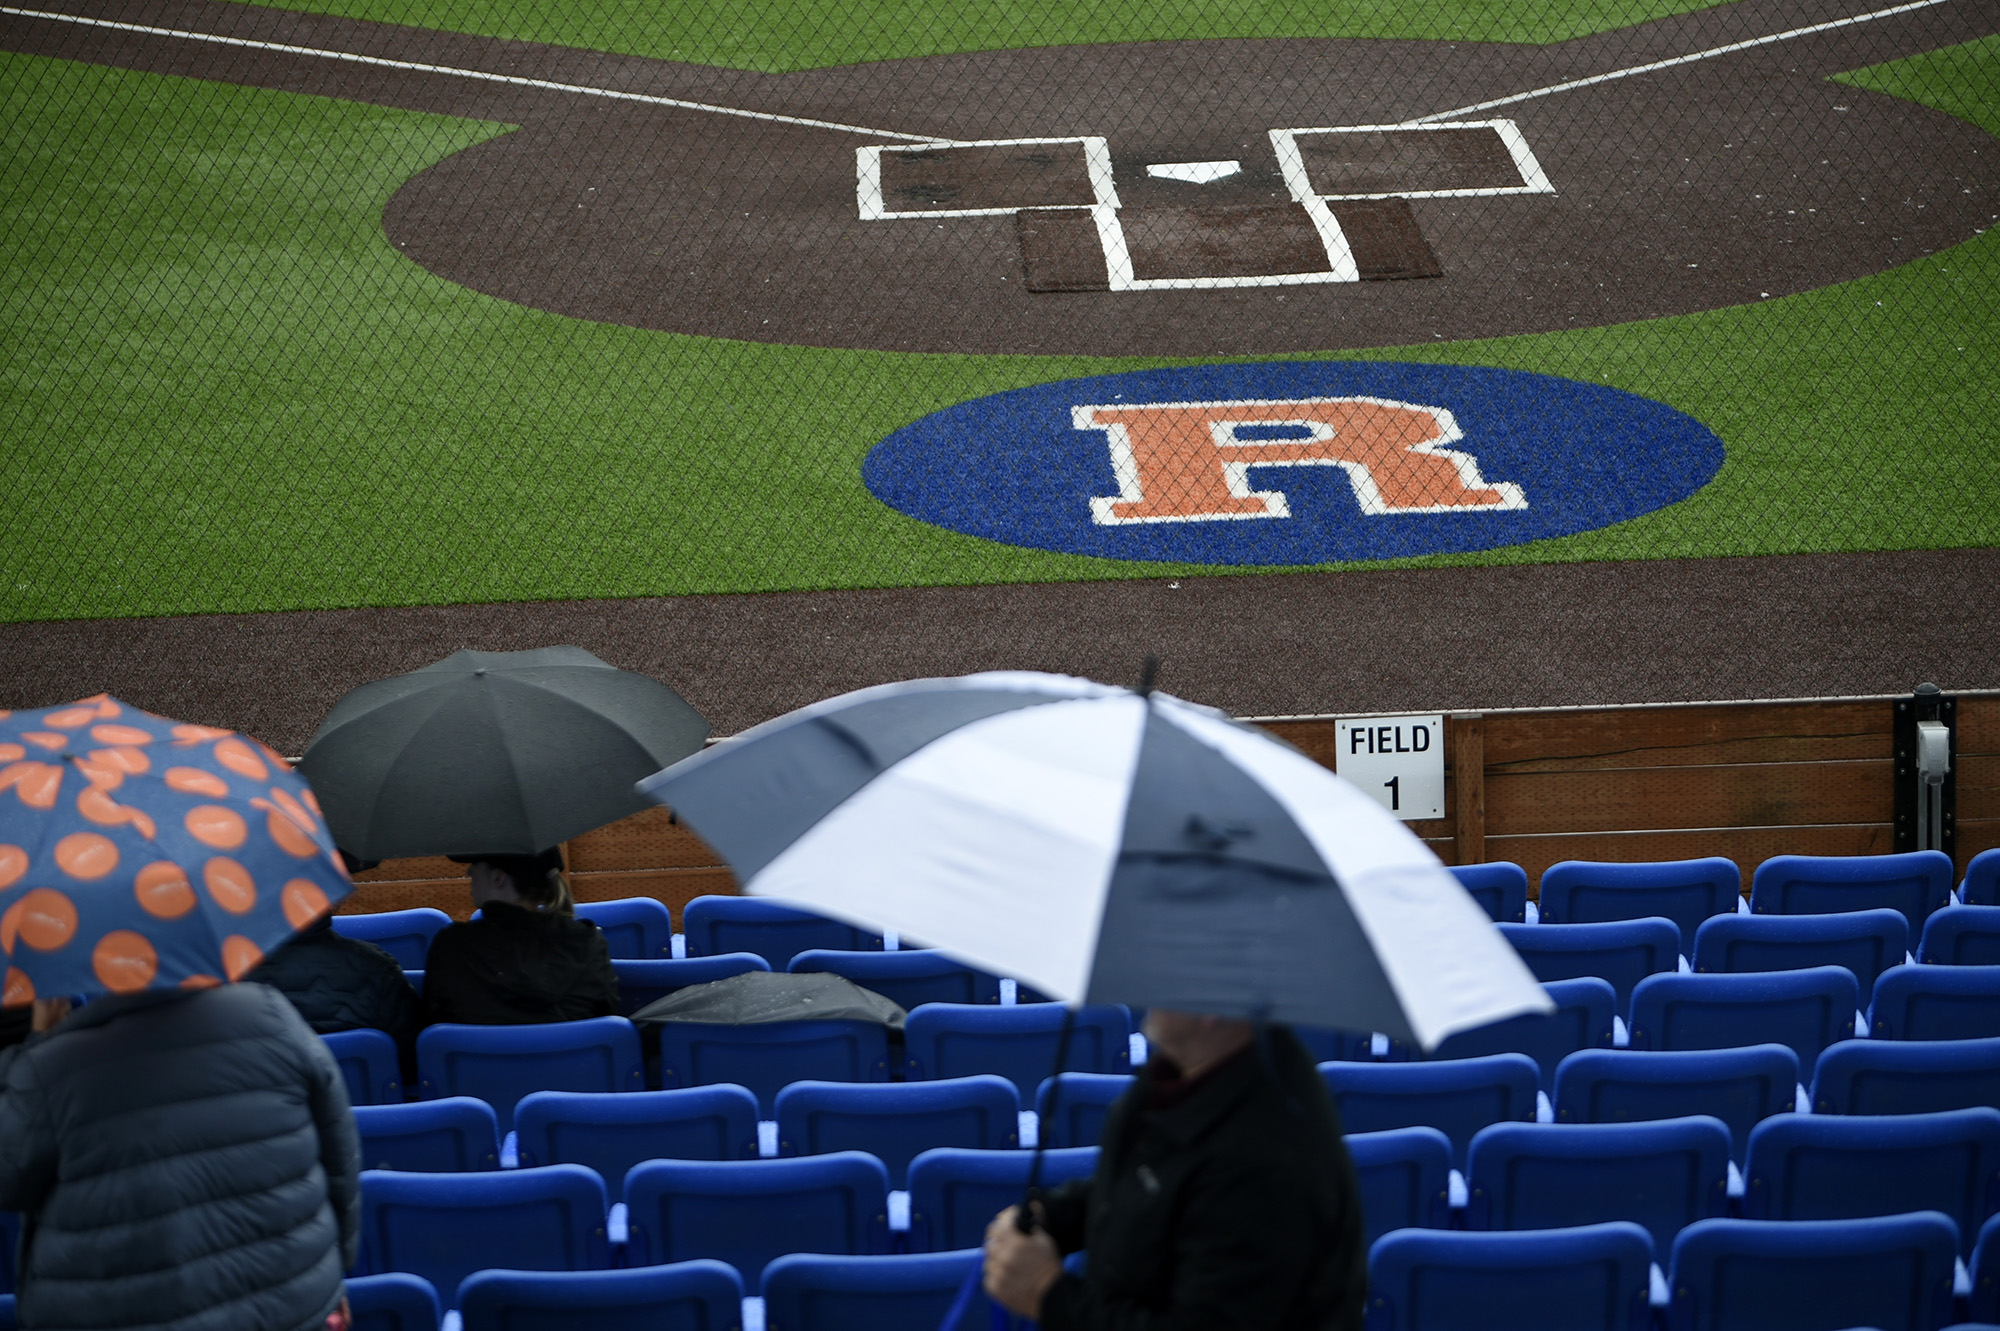 Fans use umbrellas to protect themselves from the rain, which led to the Ridgefield Raptors’ game vs. the Cowlitz Black Bears to be rained out on Sunday, June 18.